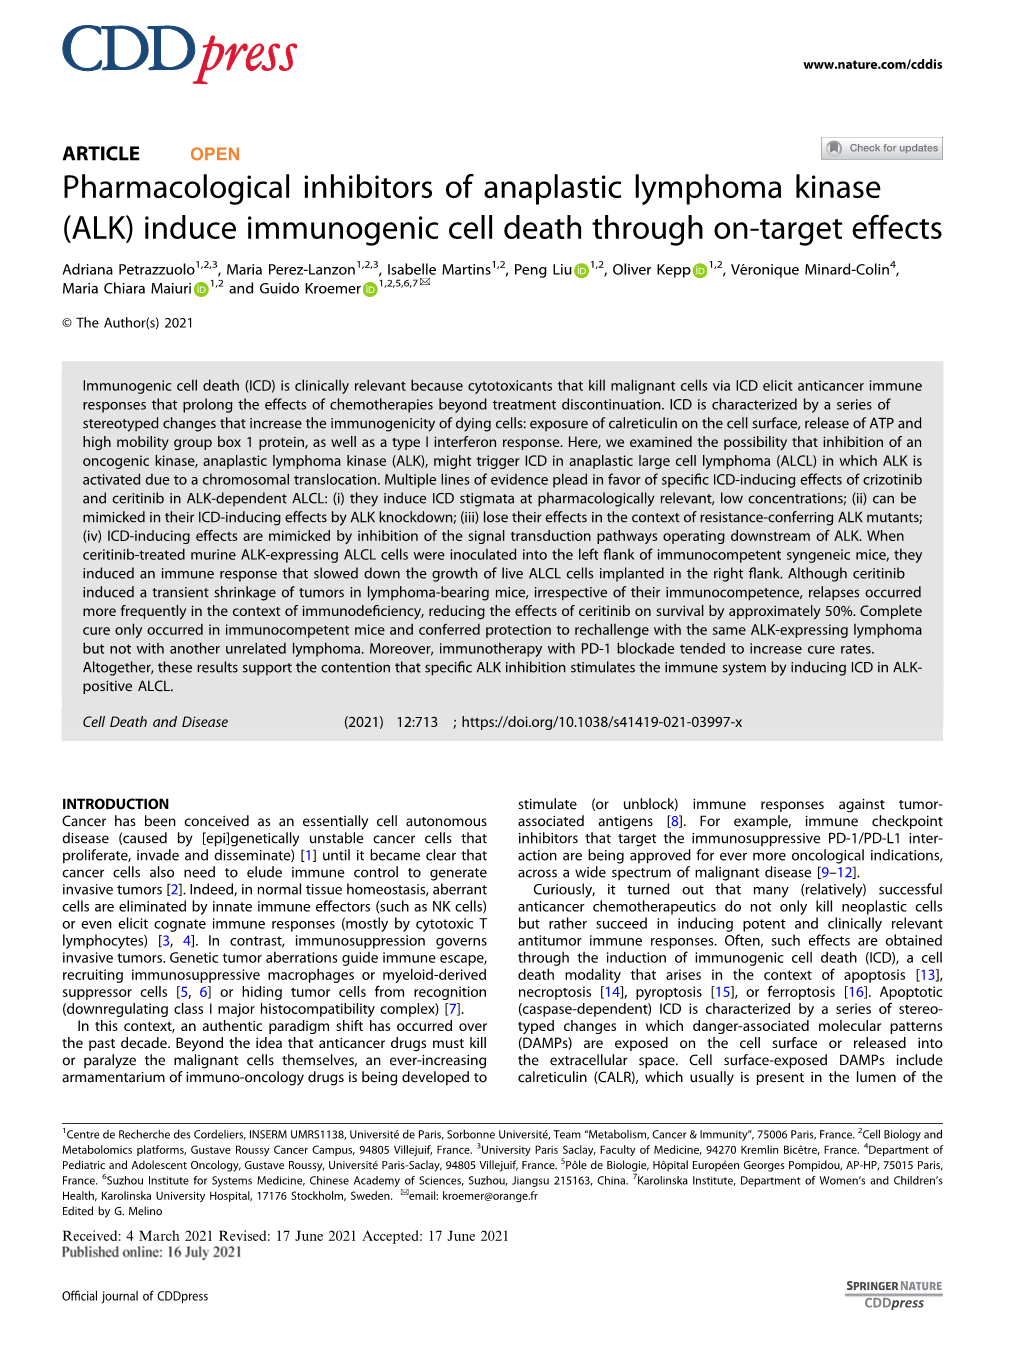 Induce Immunogenic Cell Death Through On-Target Effects